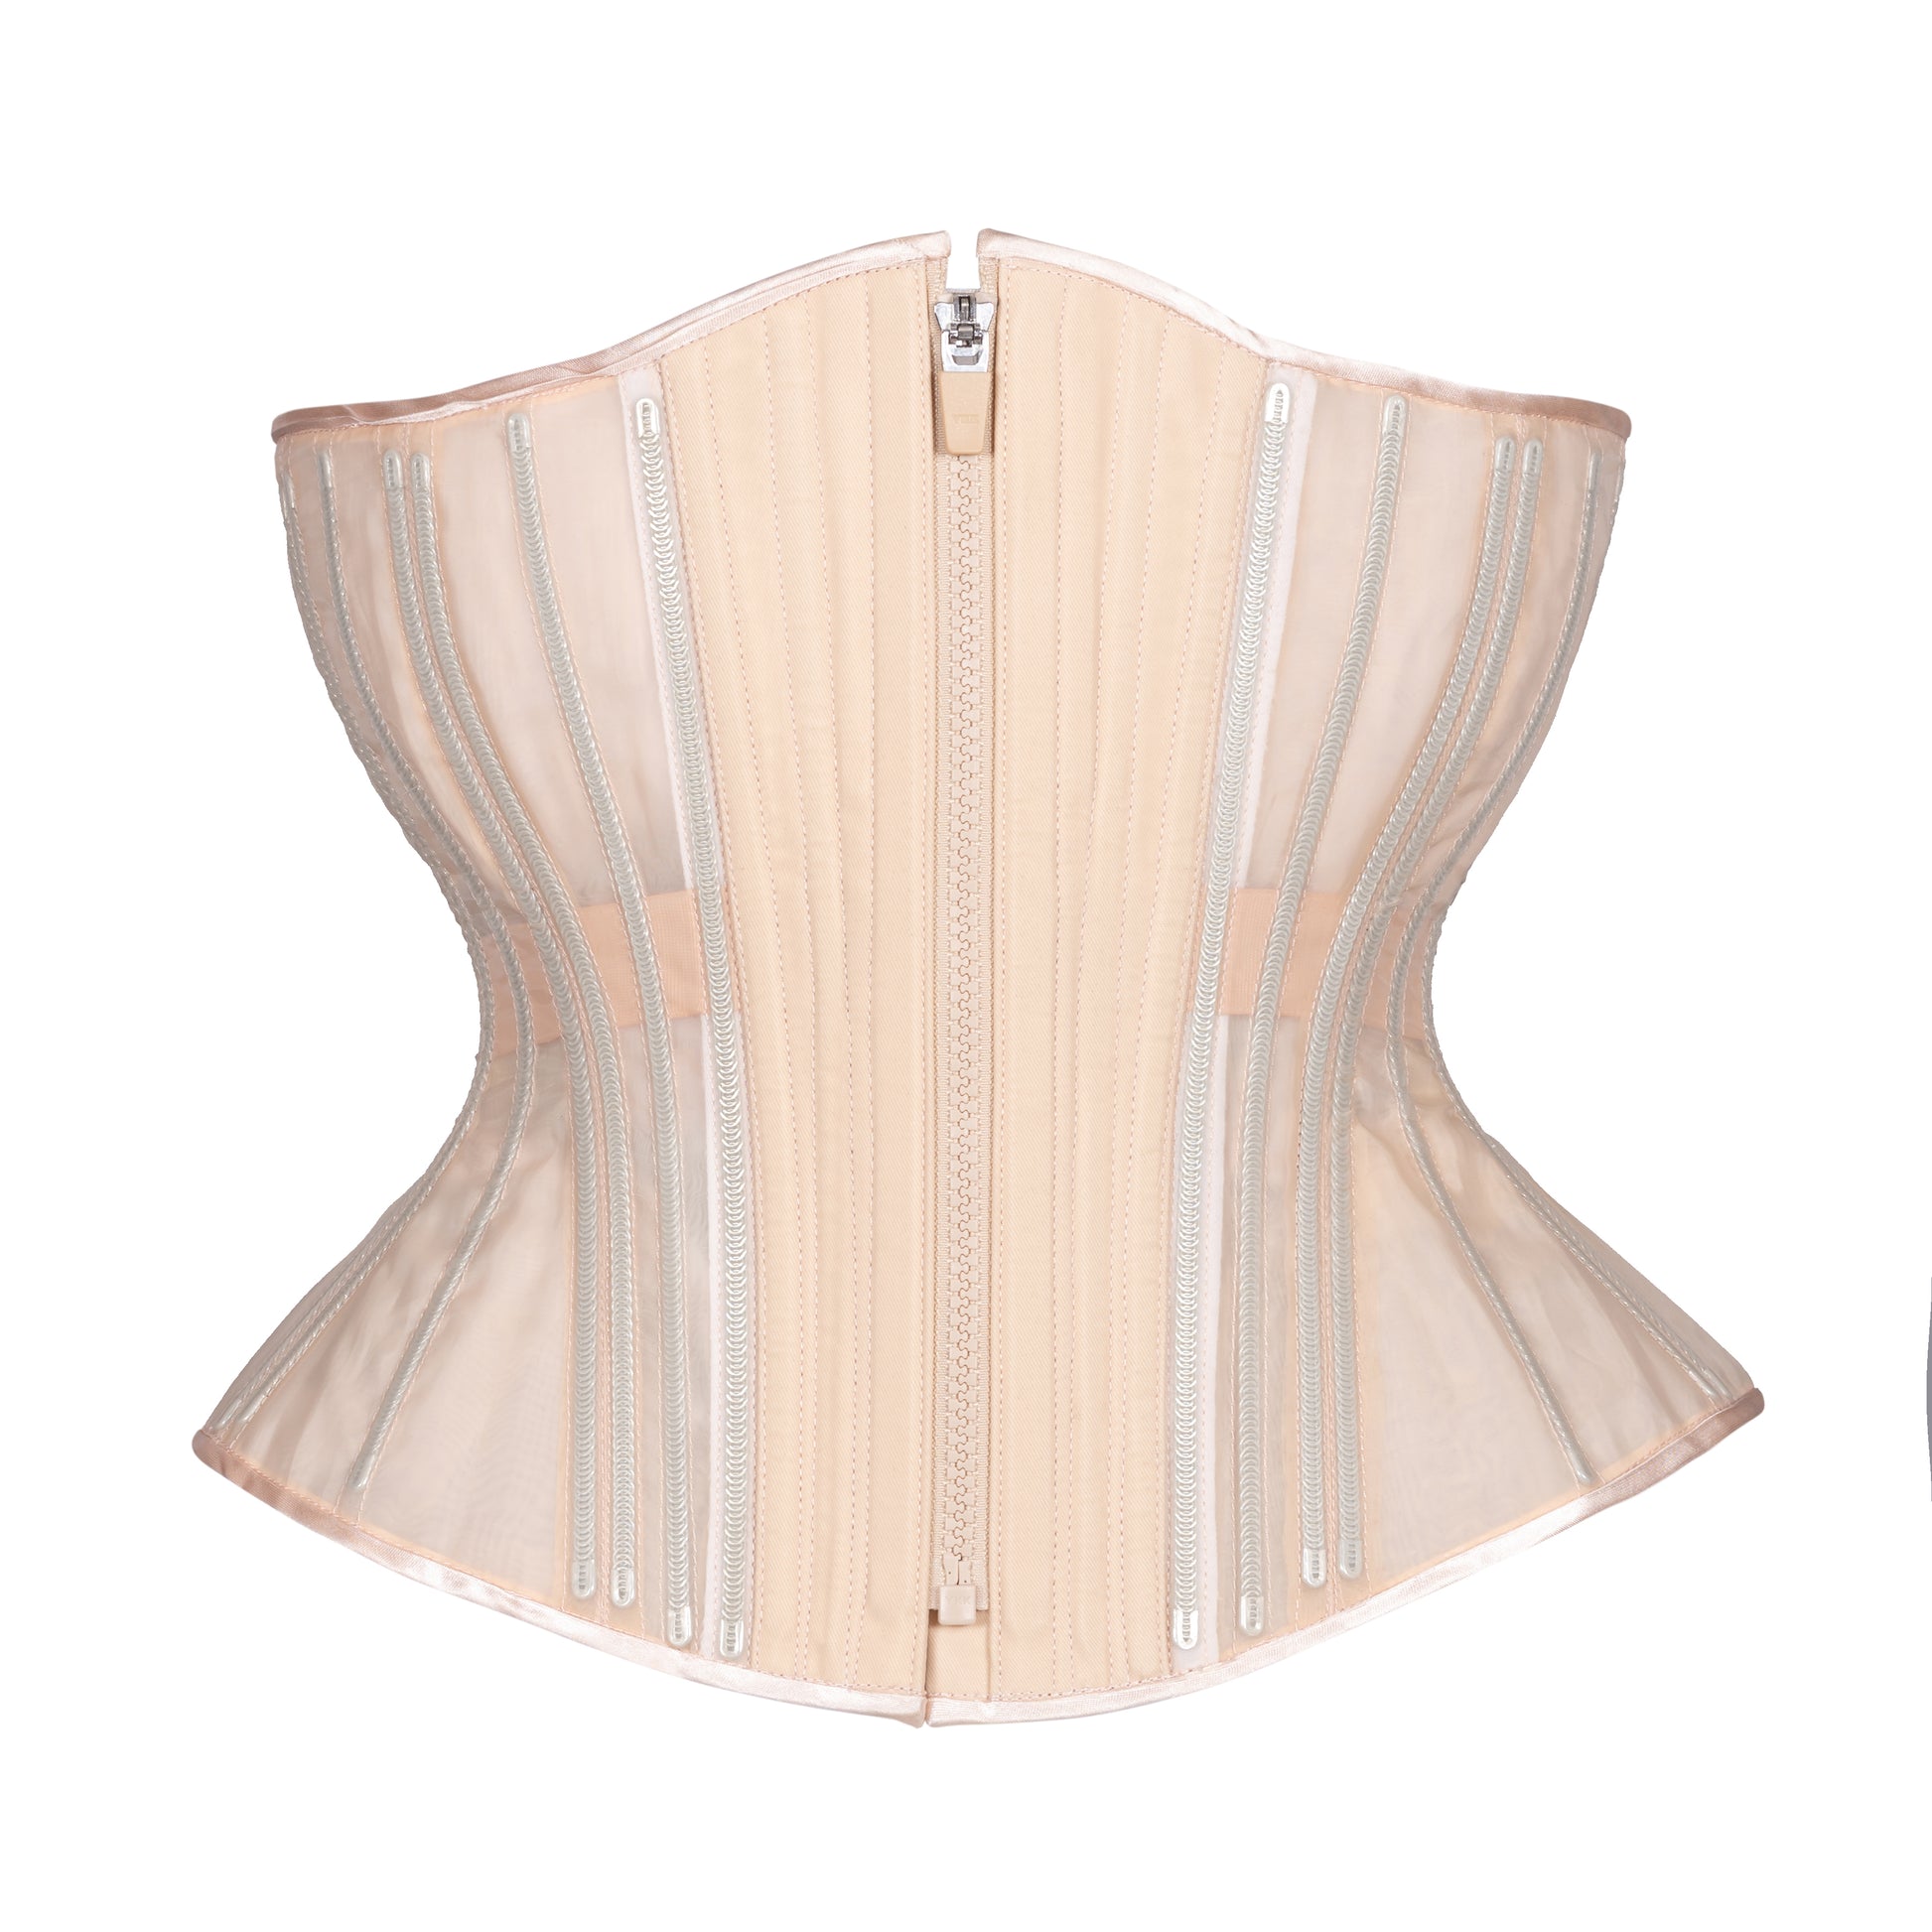 Check Out Some Great Designs Of Waist Trainer Cotton Corset Here